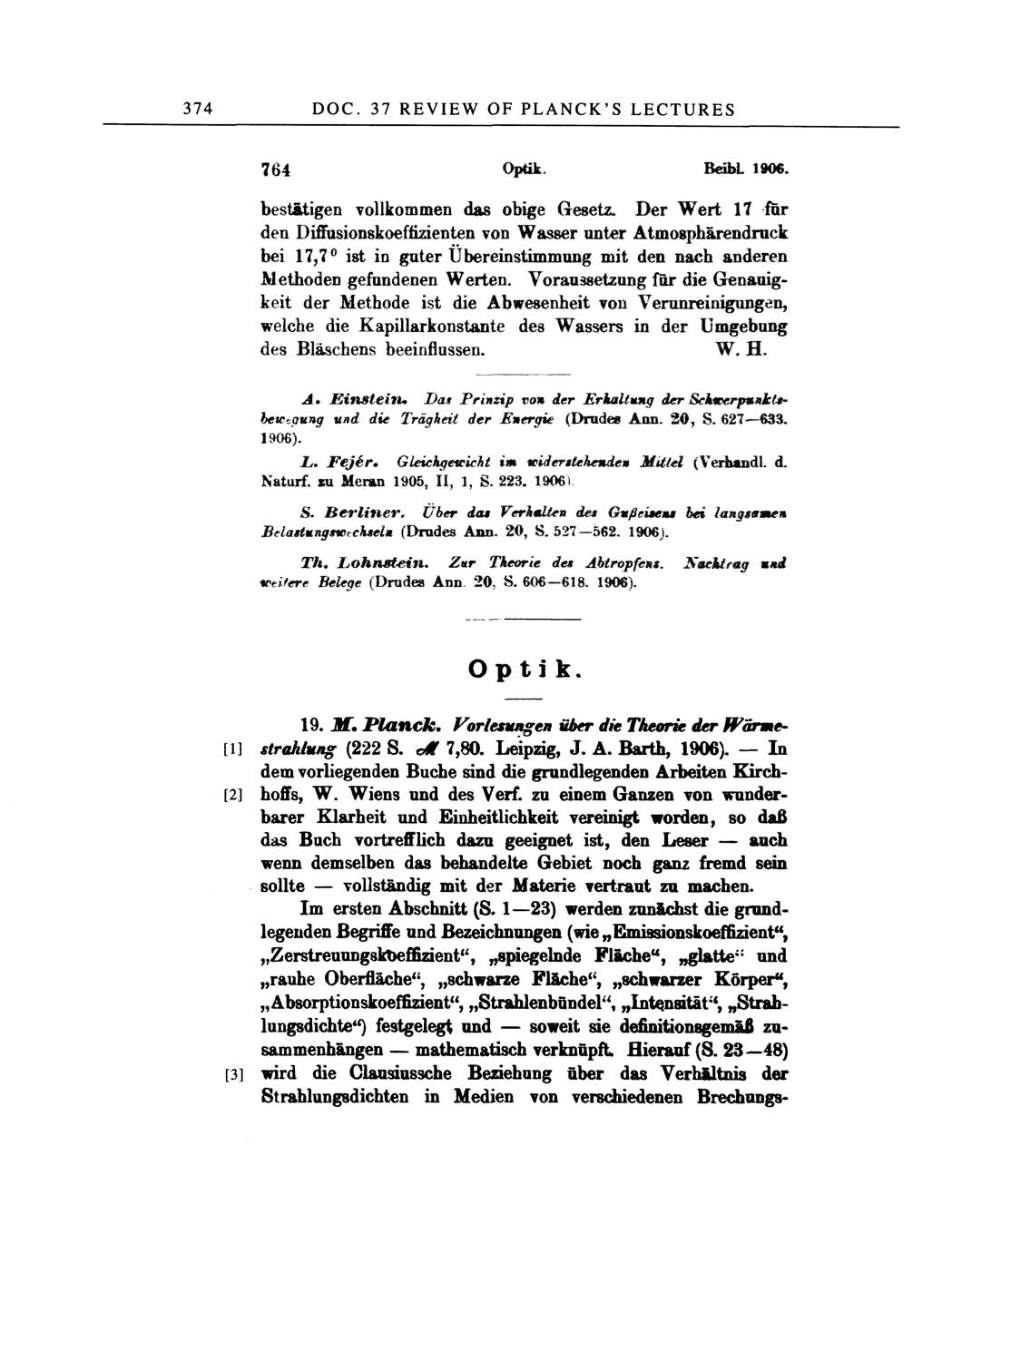 Volume 2: The Swiss Years: Writings, 1900-1909 page 374